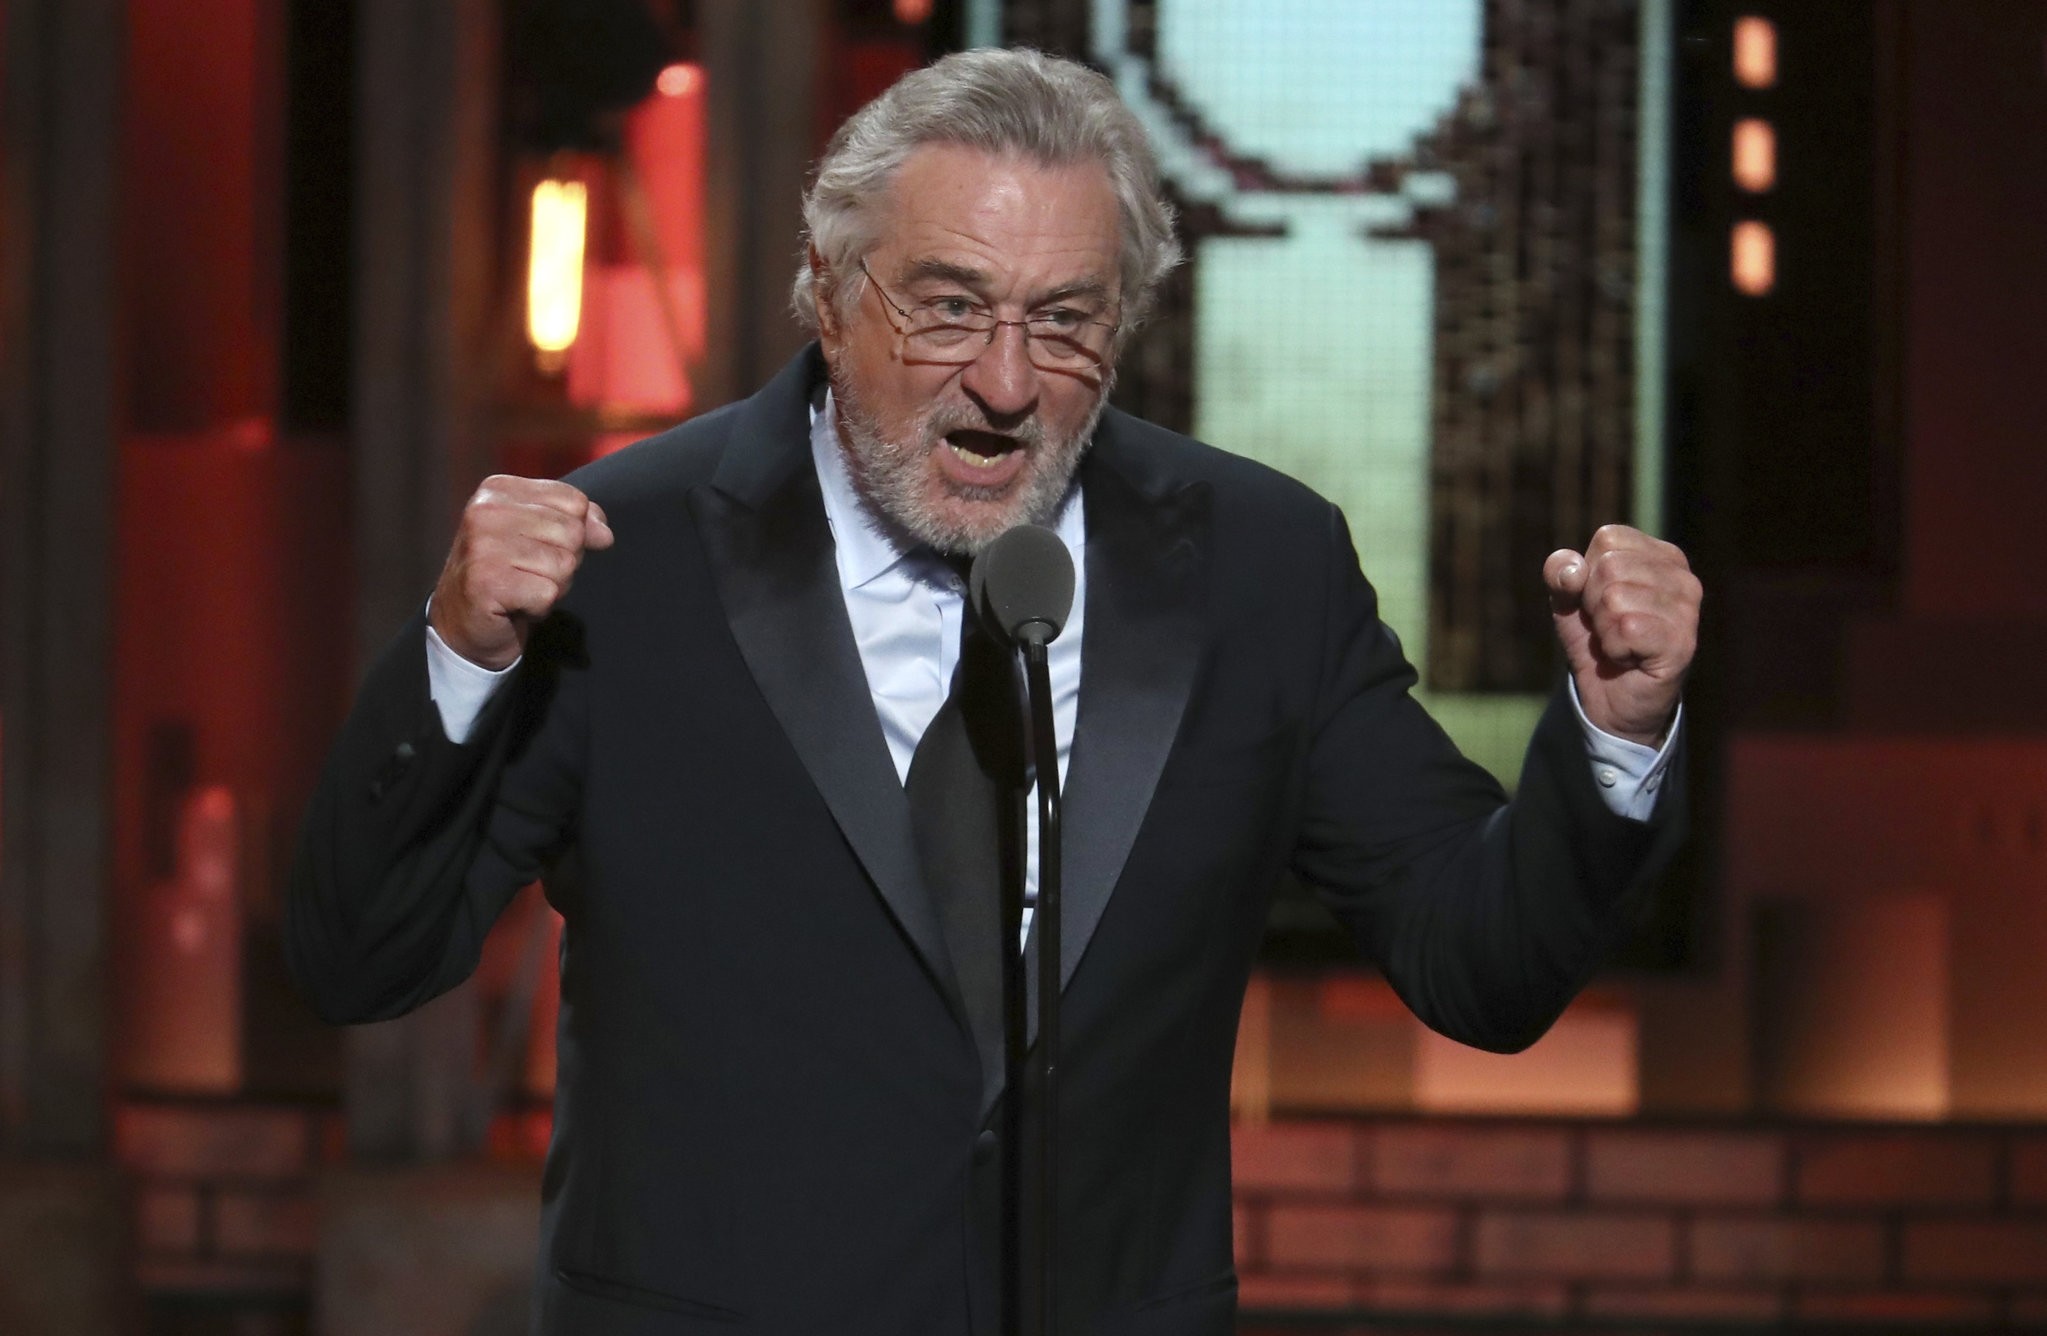 Before introducing a performance by Bruce Springsteen at the Tony Awards, Oscar-winning actor Robert de Niro used some profane language to criticize U.S. President Donald Trump, June 10.